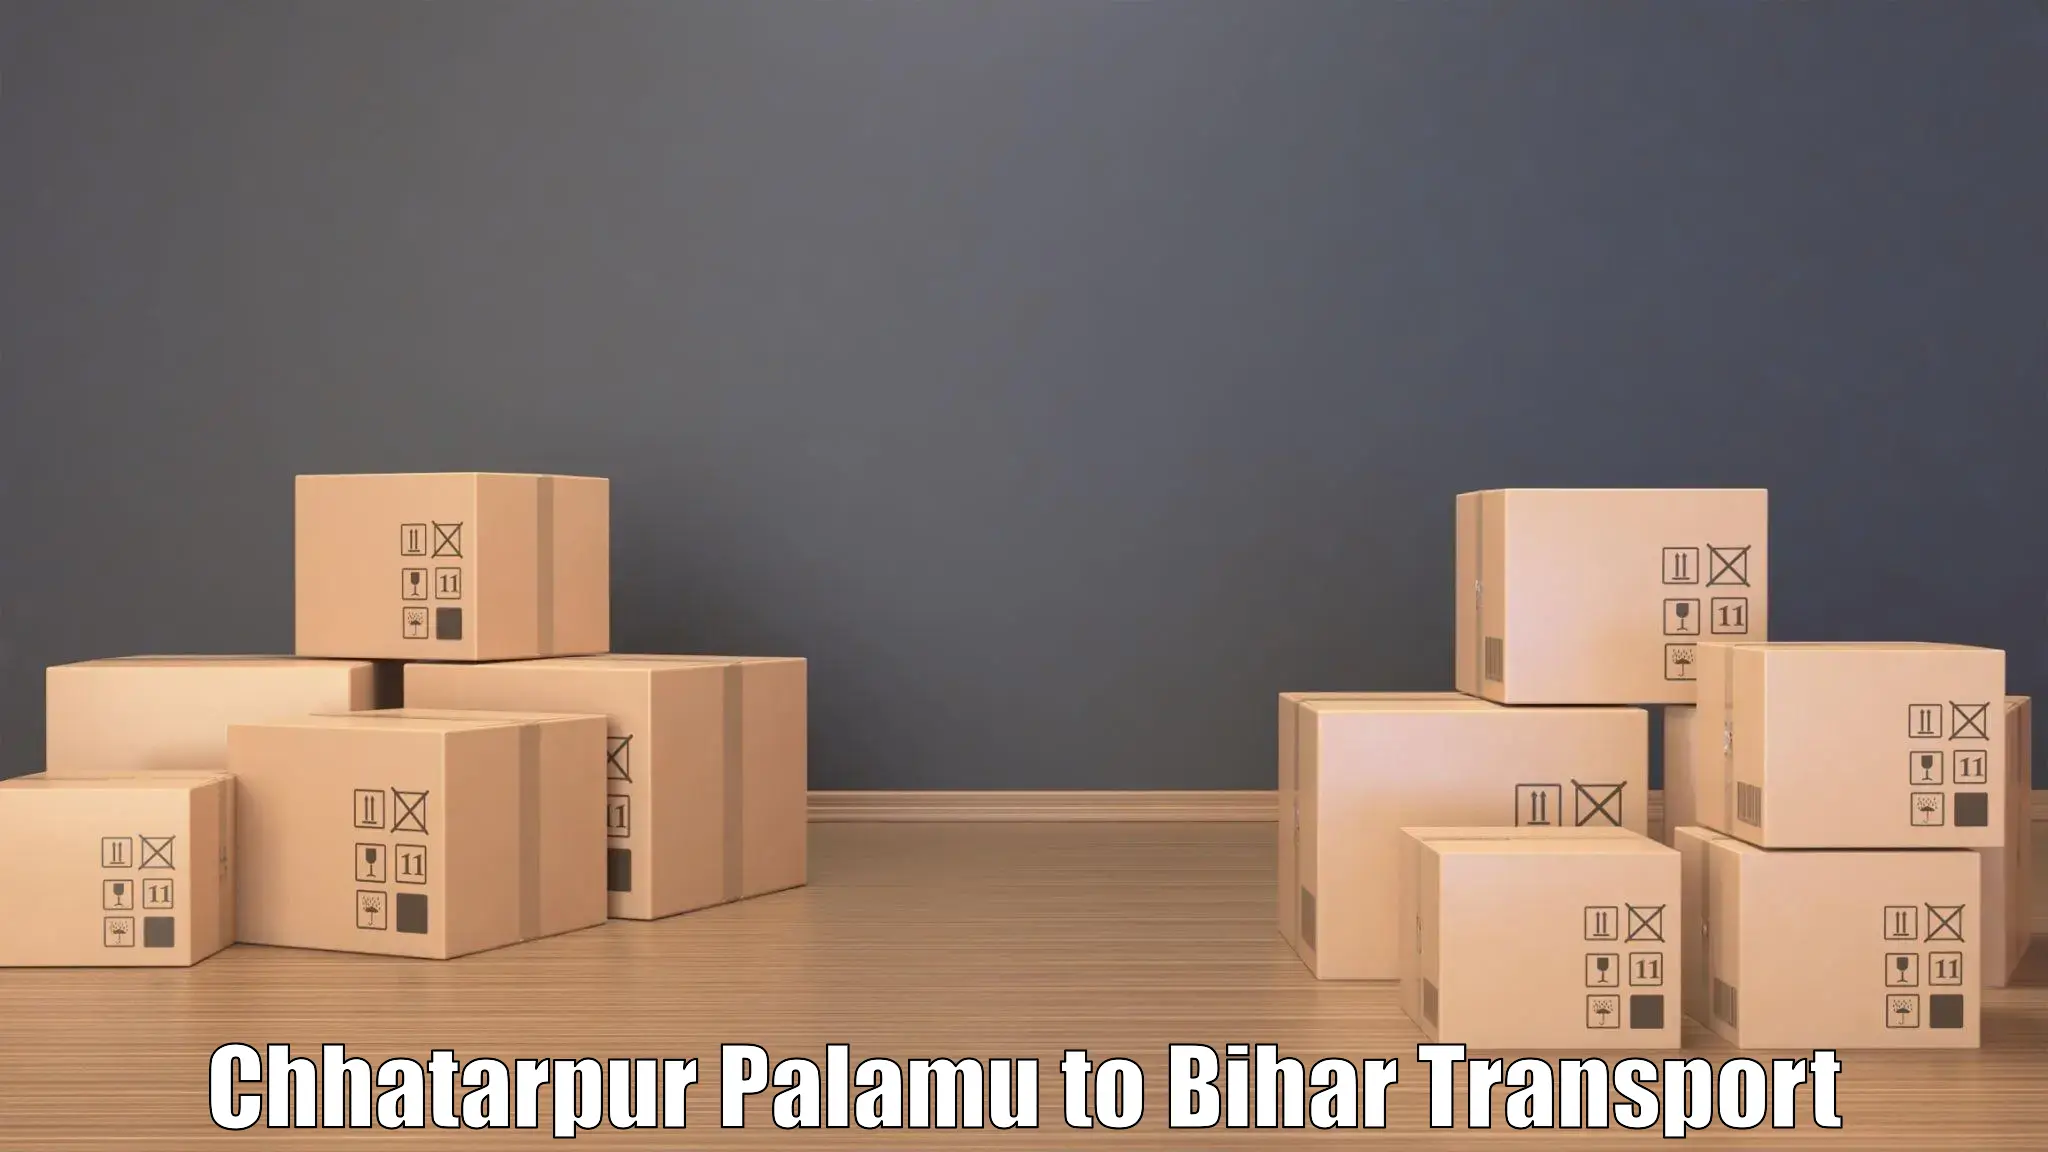 Package delivery services Chhatarpur Palamu to Jhanjharpur